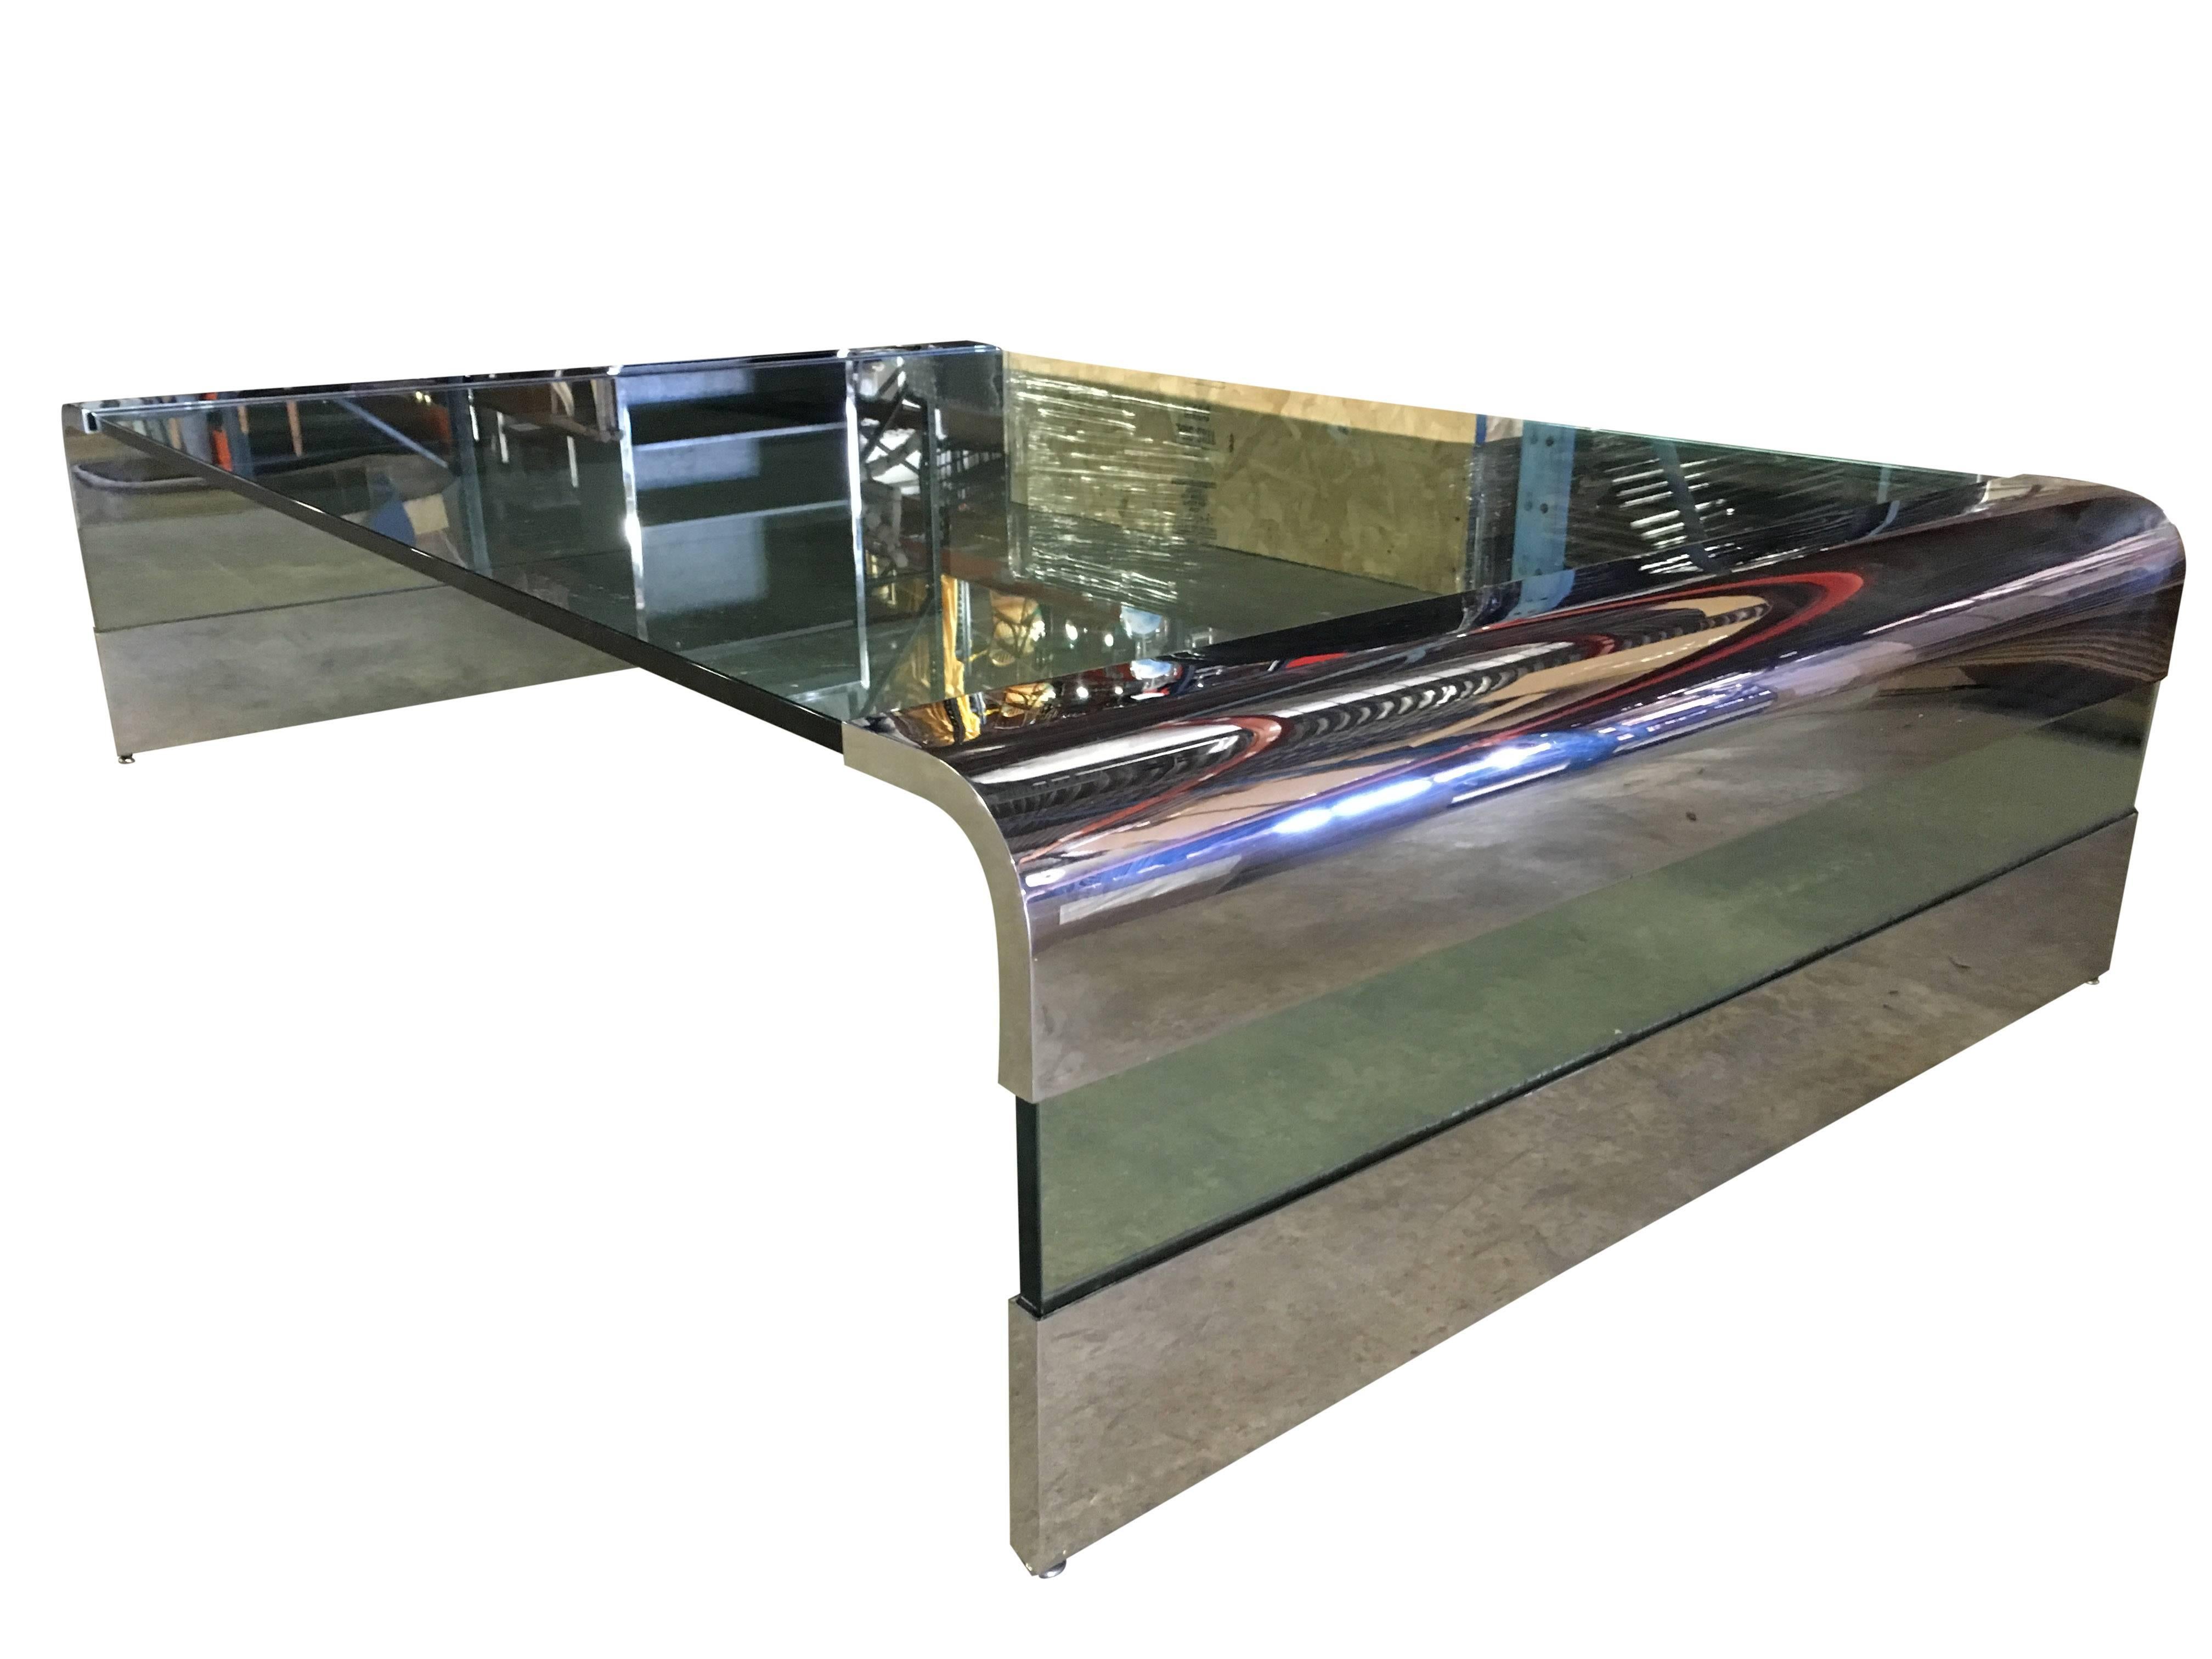 Massive chrome and thick glass coffee table by Pace Collection. Rare and large form with a dramatic presence. Retains original 